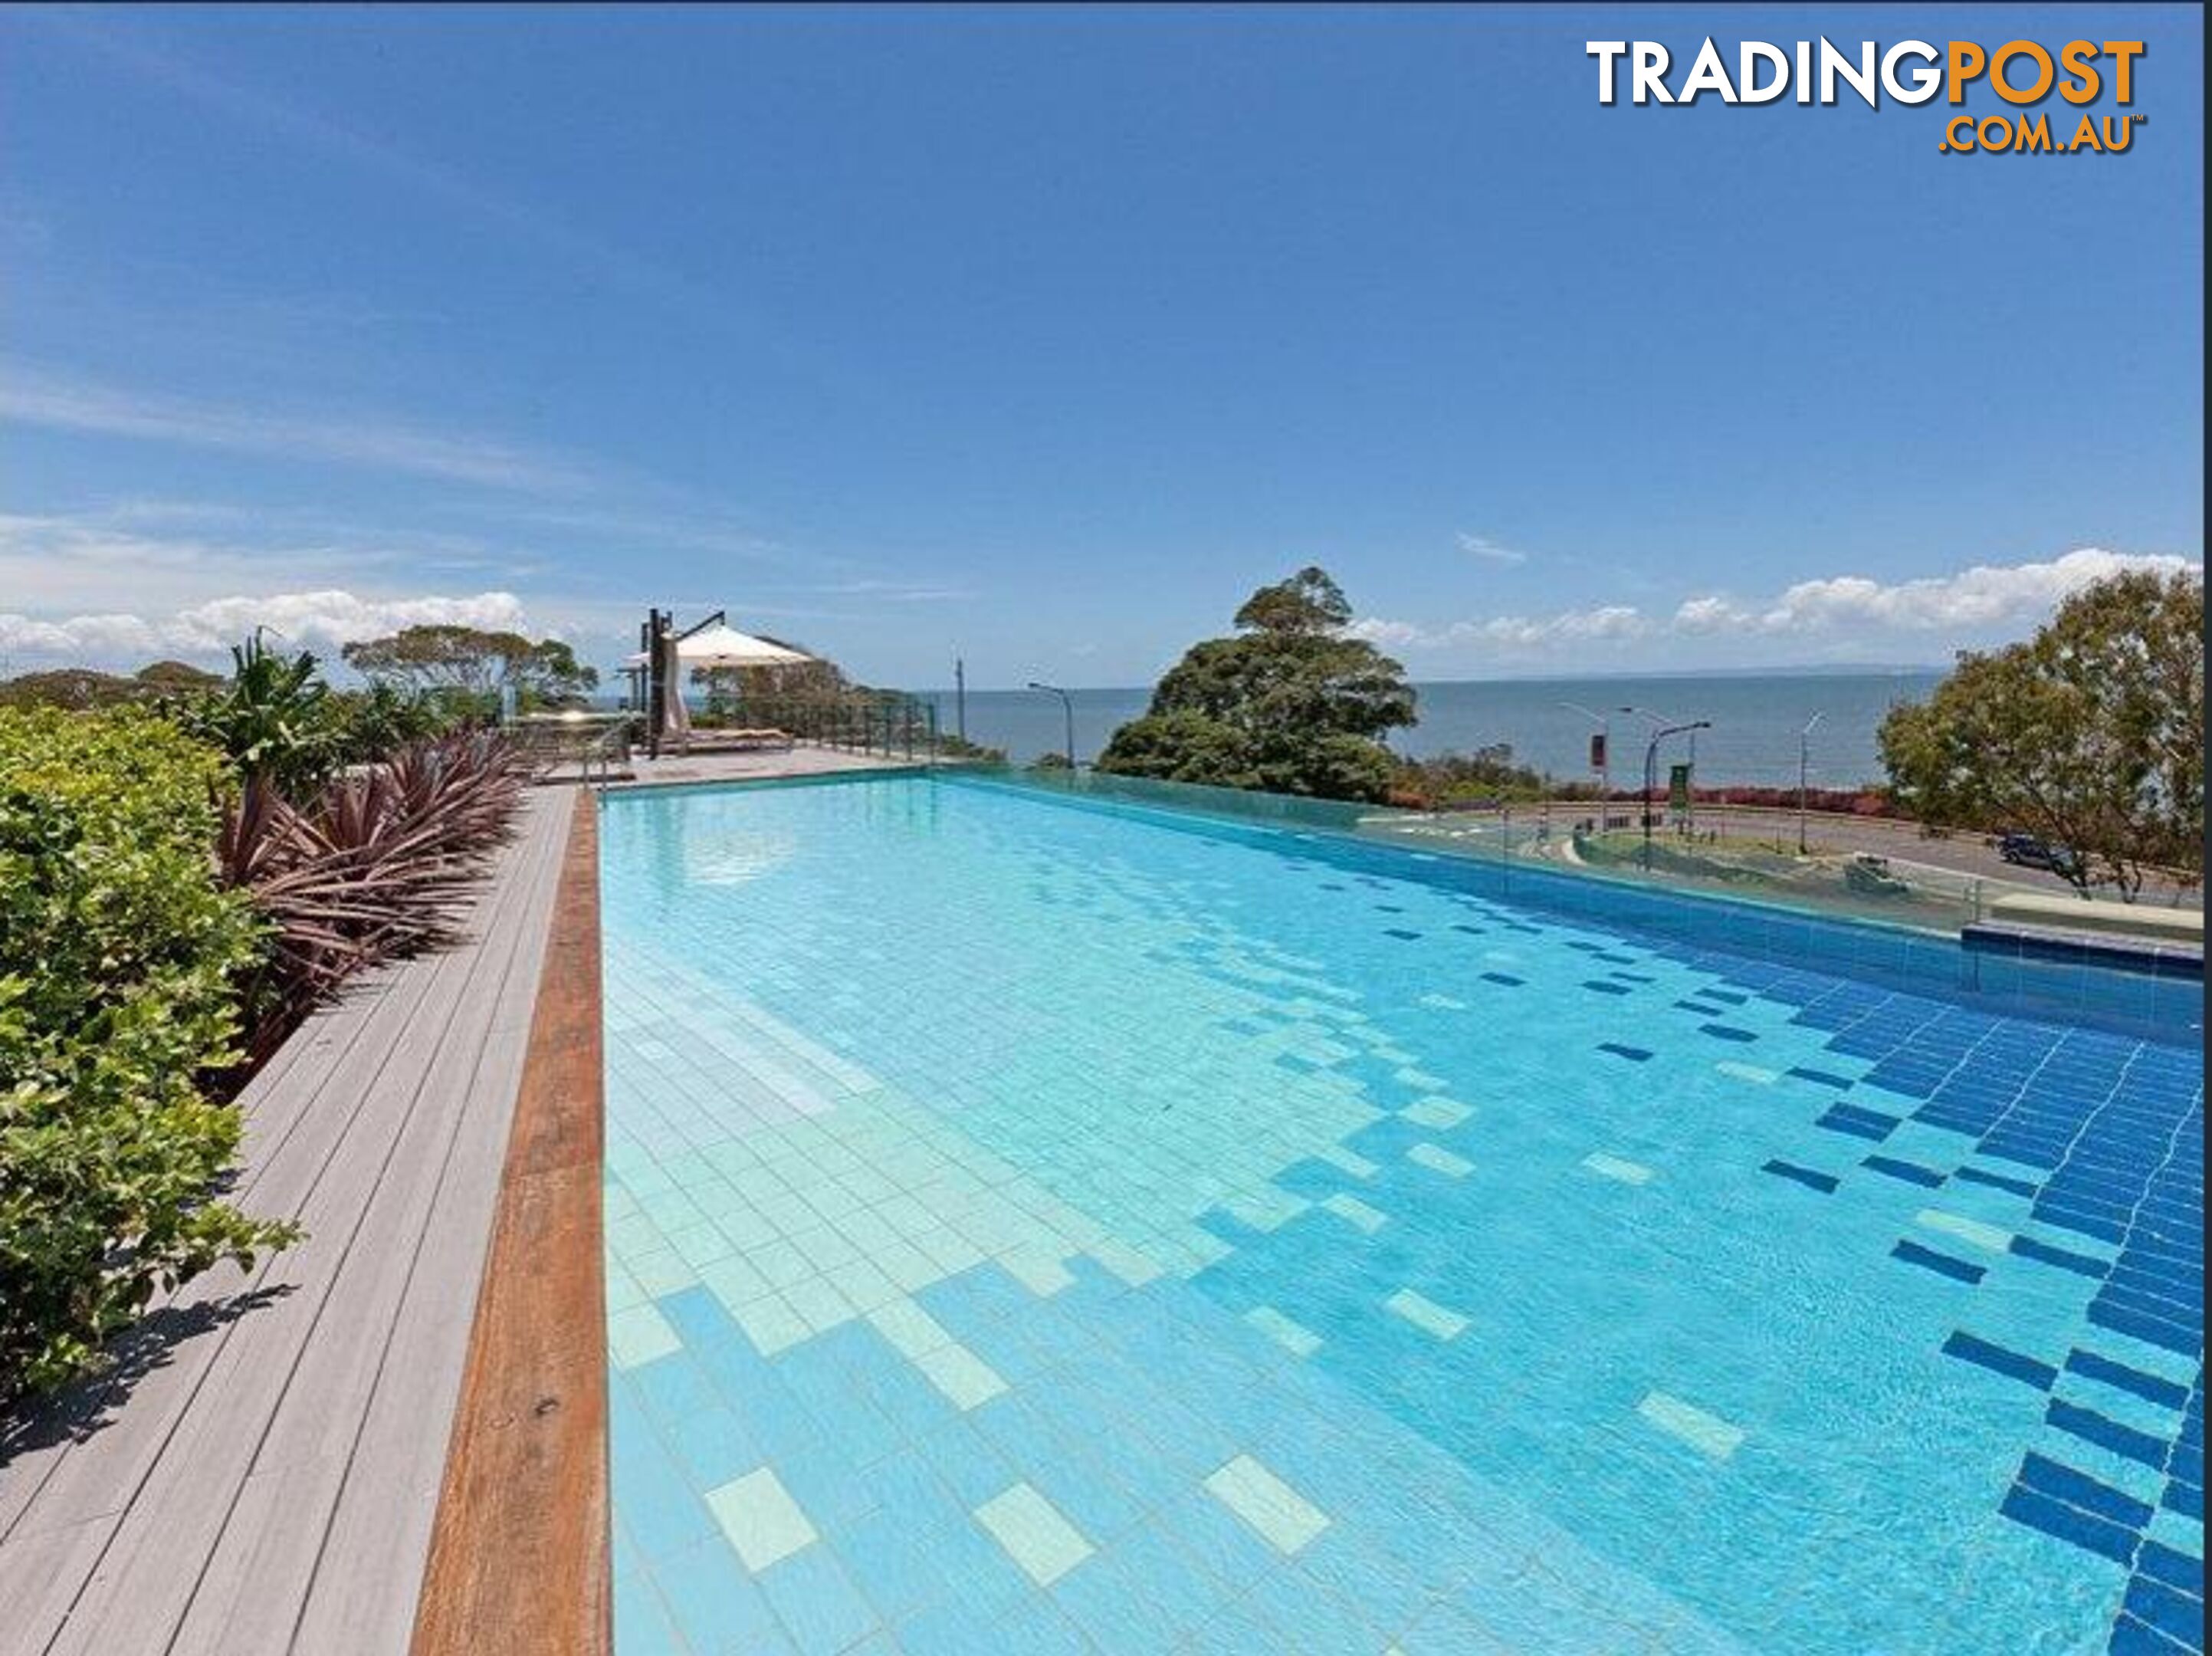 206/99 Marine Parade REDCLIFFE QLD 4020